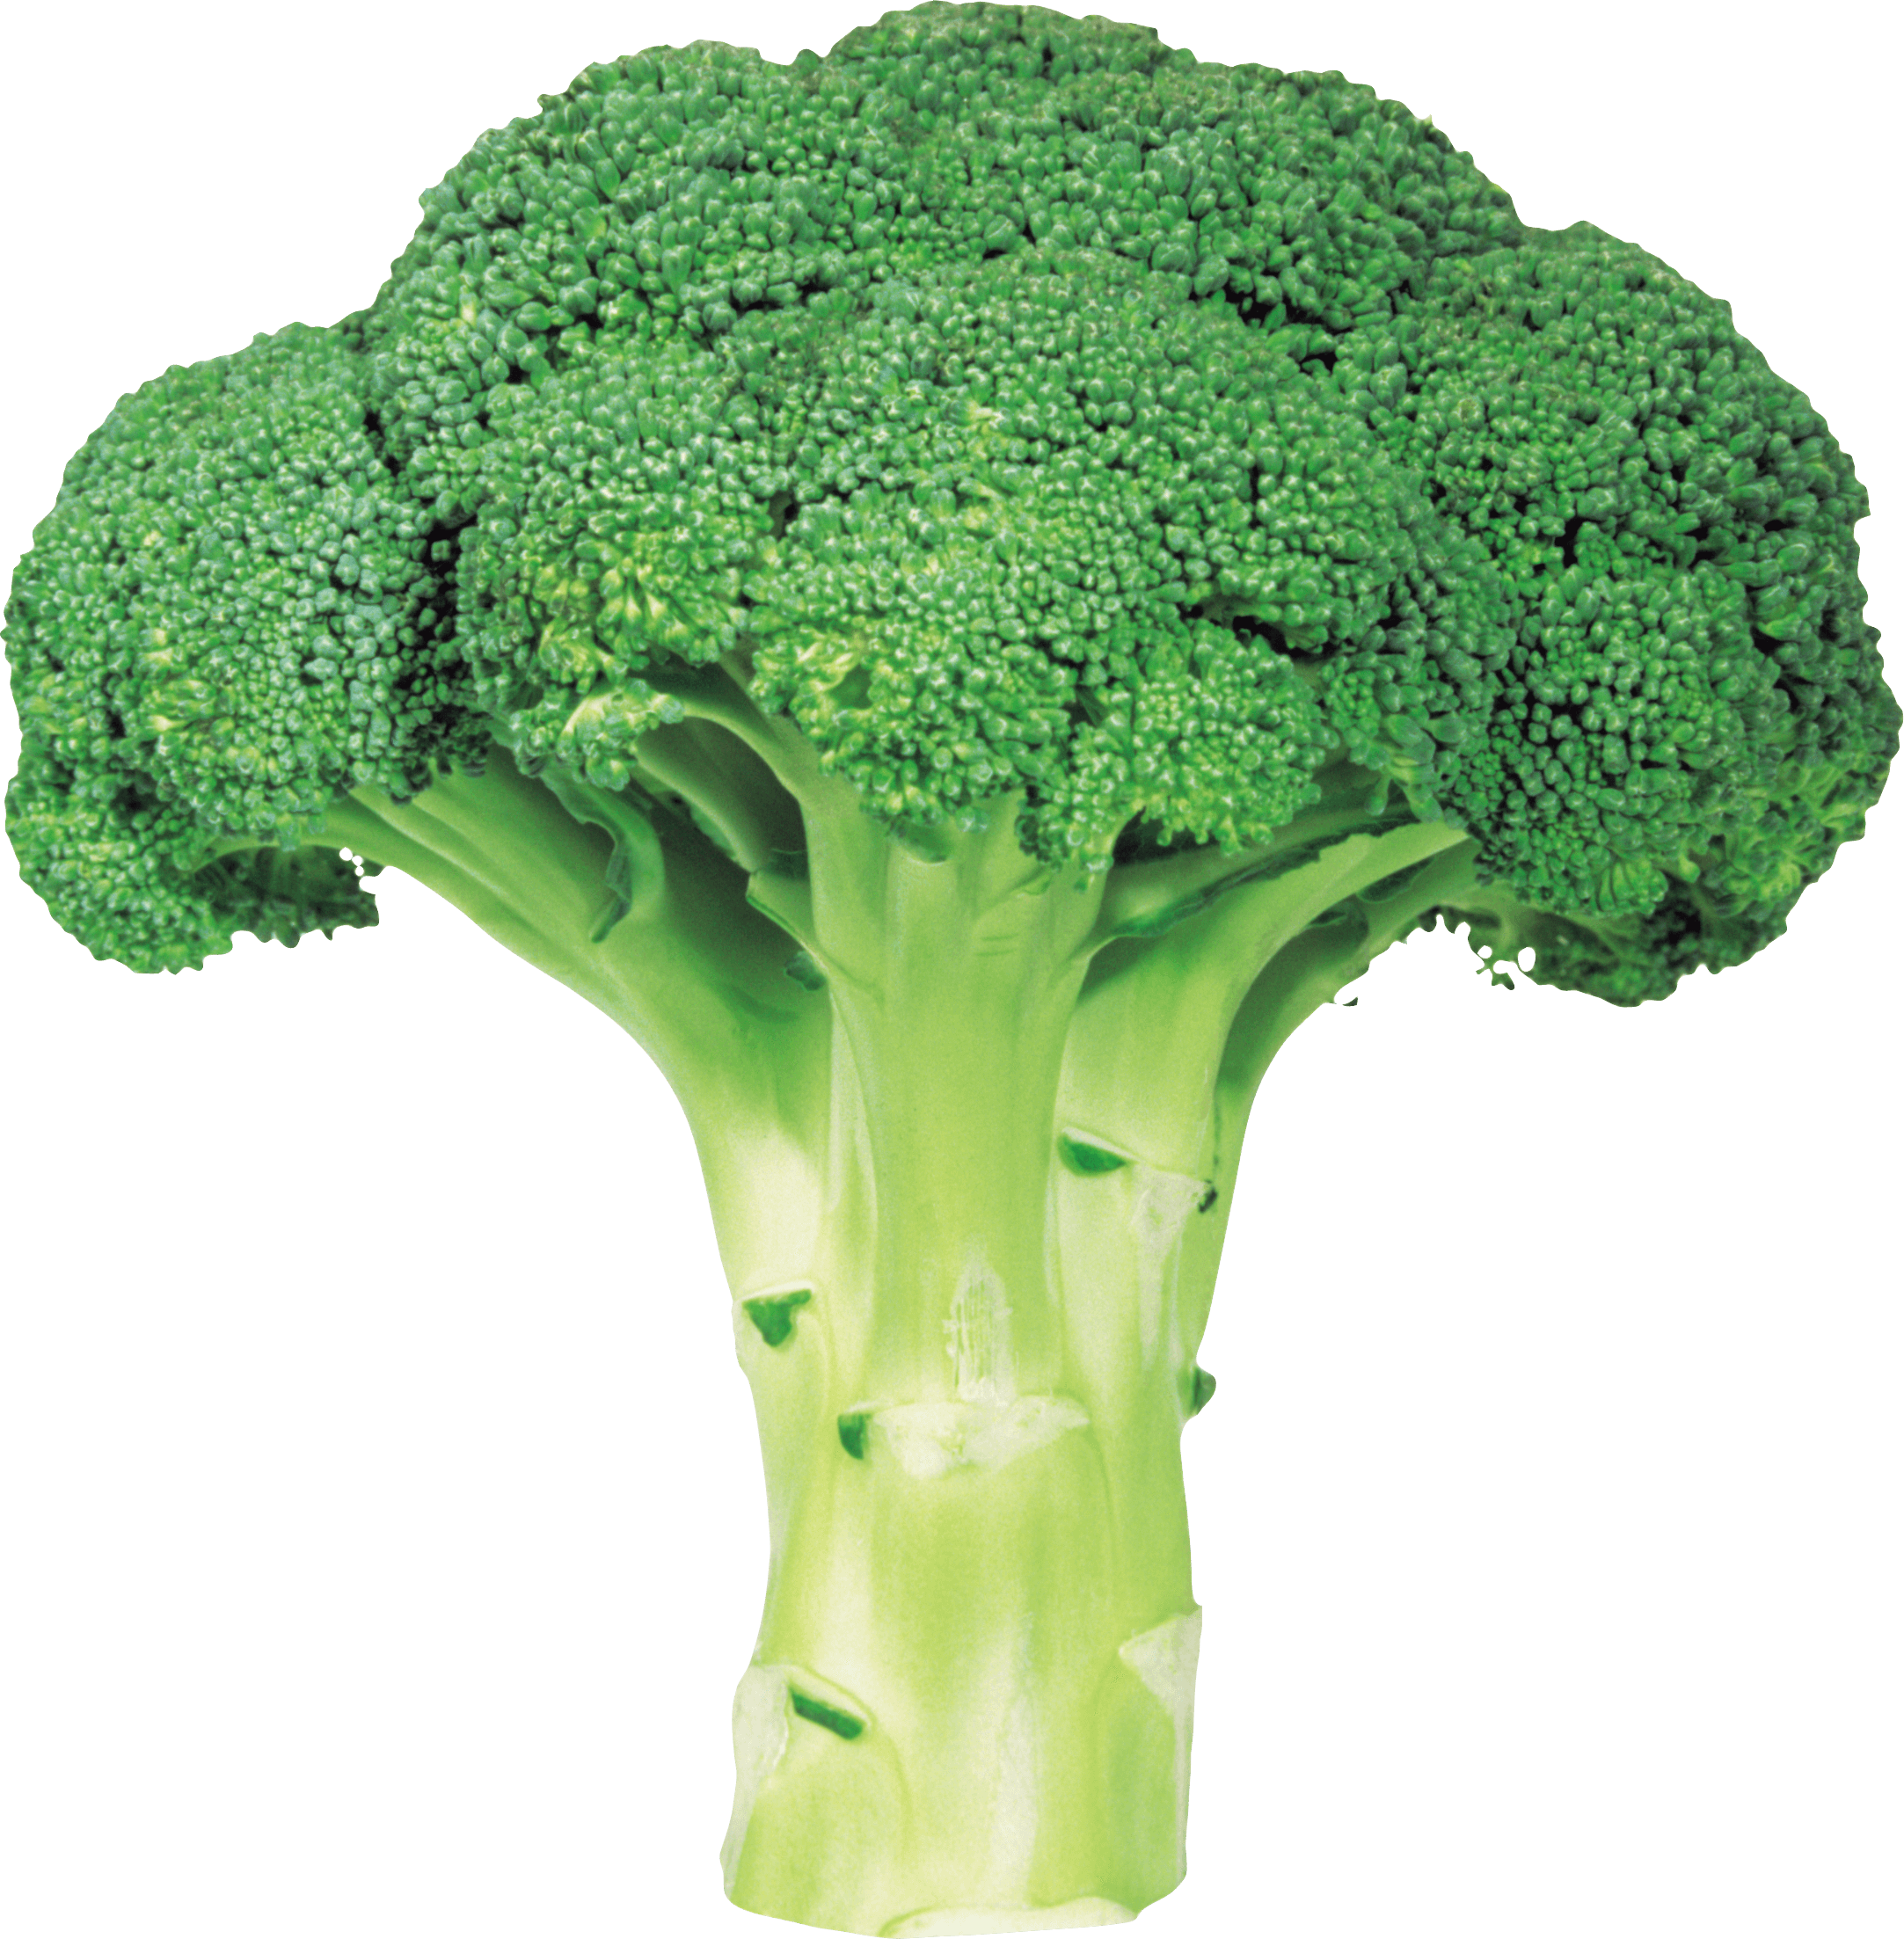 download broccoli png image with transparent background png image pngimg #28672